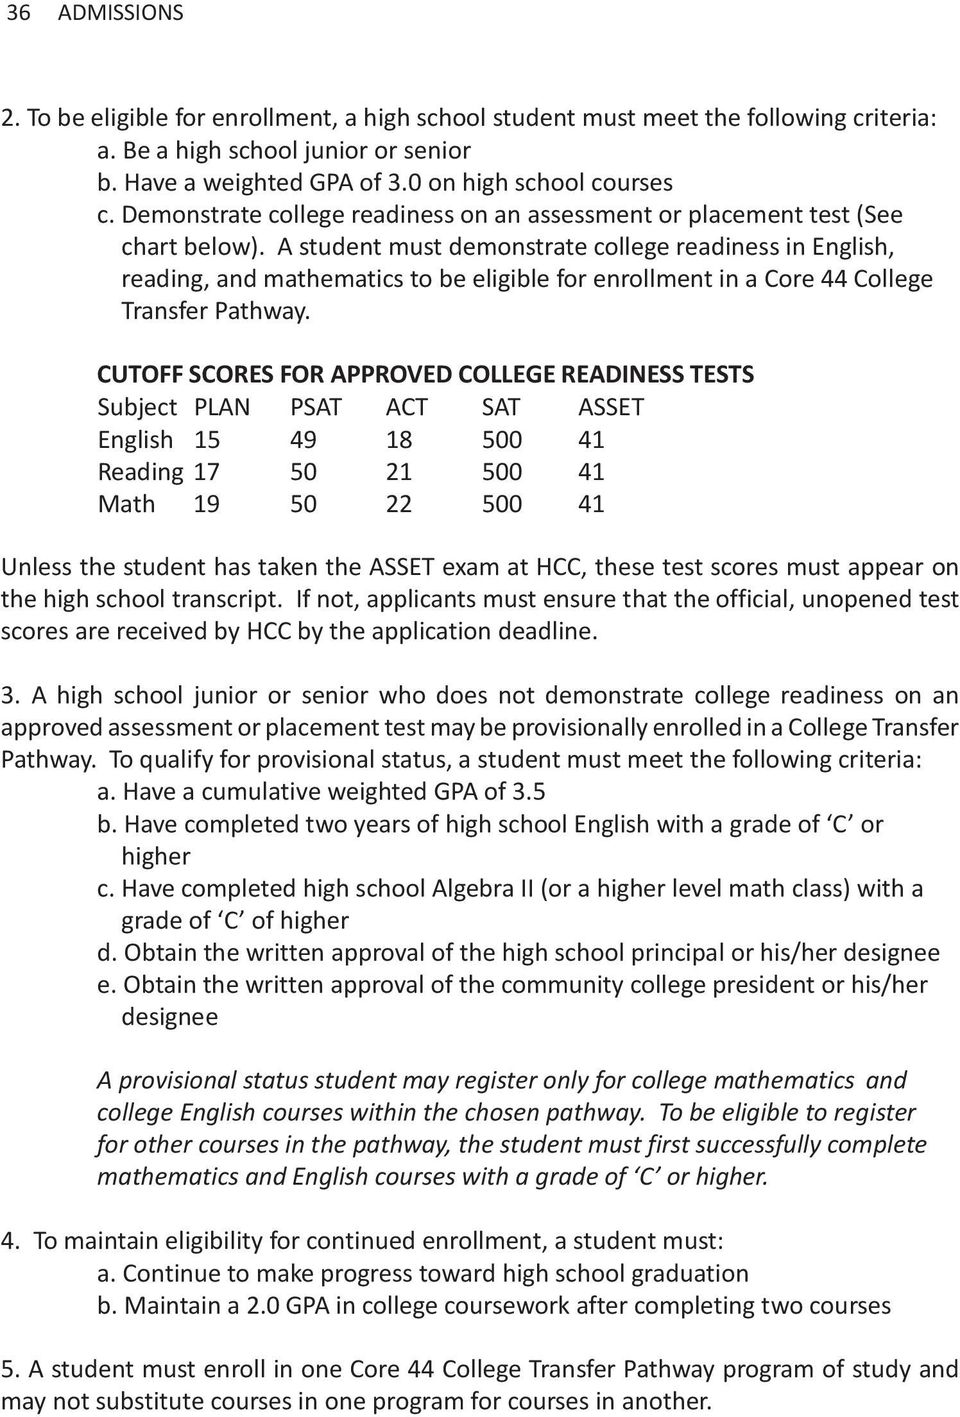 A student must demonstrate college readiness in English, reading, and mathematics to be eligible for enrollment in a Core 44 College Transfer Pathway.